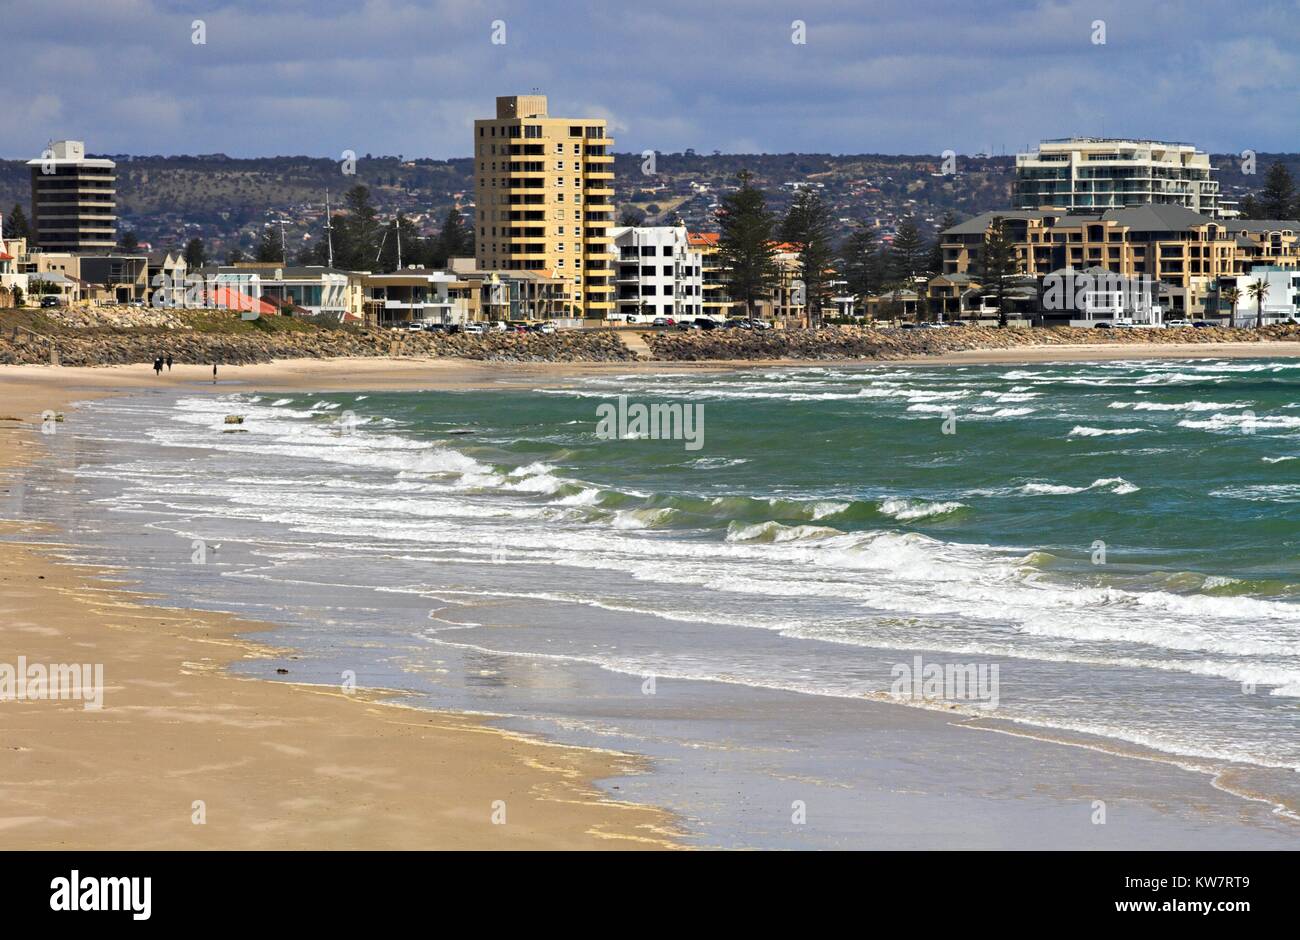 View across the beach to the Glenelg foreshore in Adelaide on a sunny day. Stock Photo